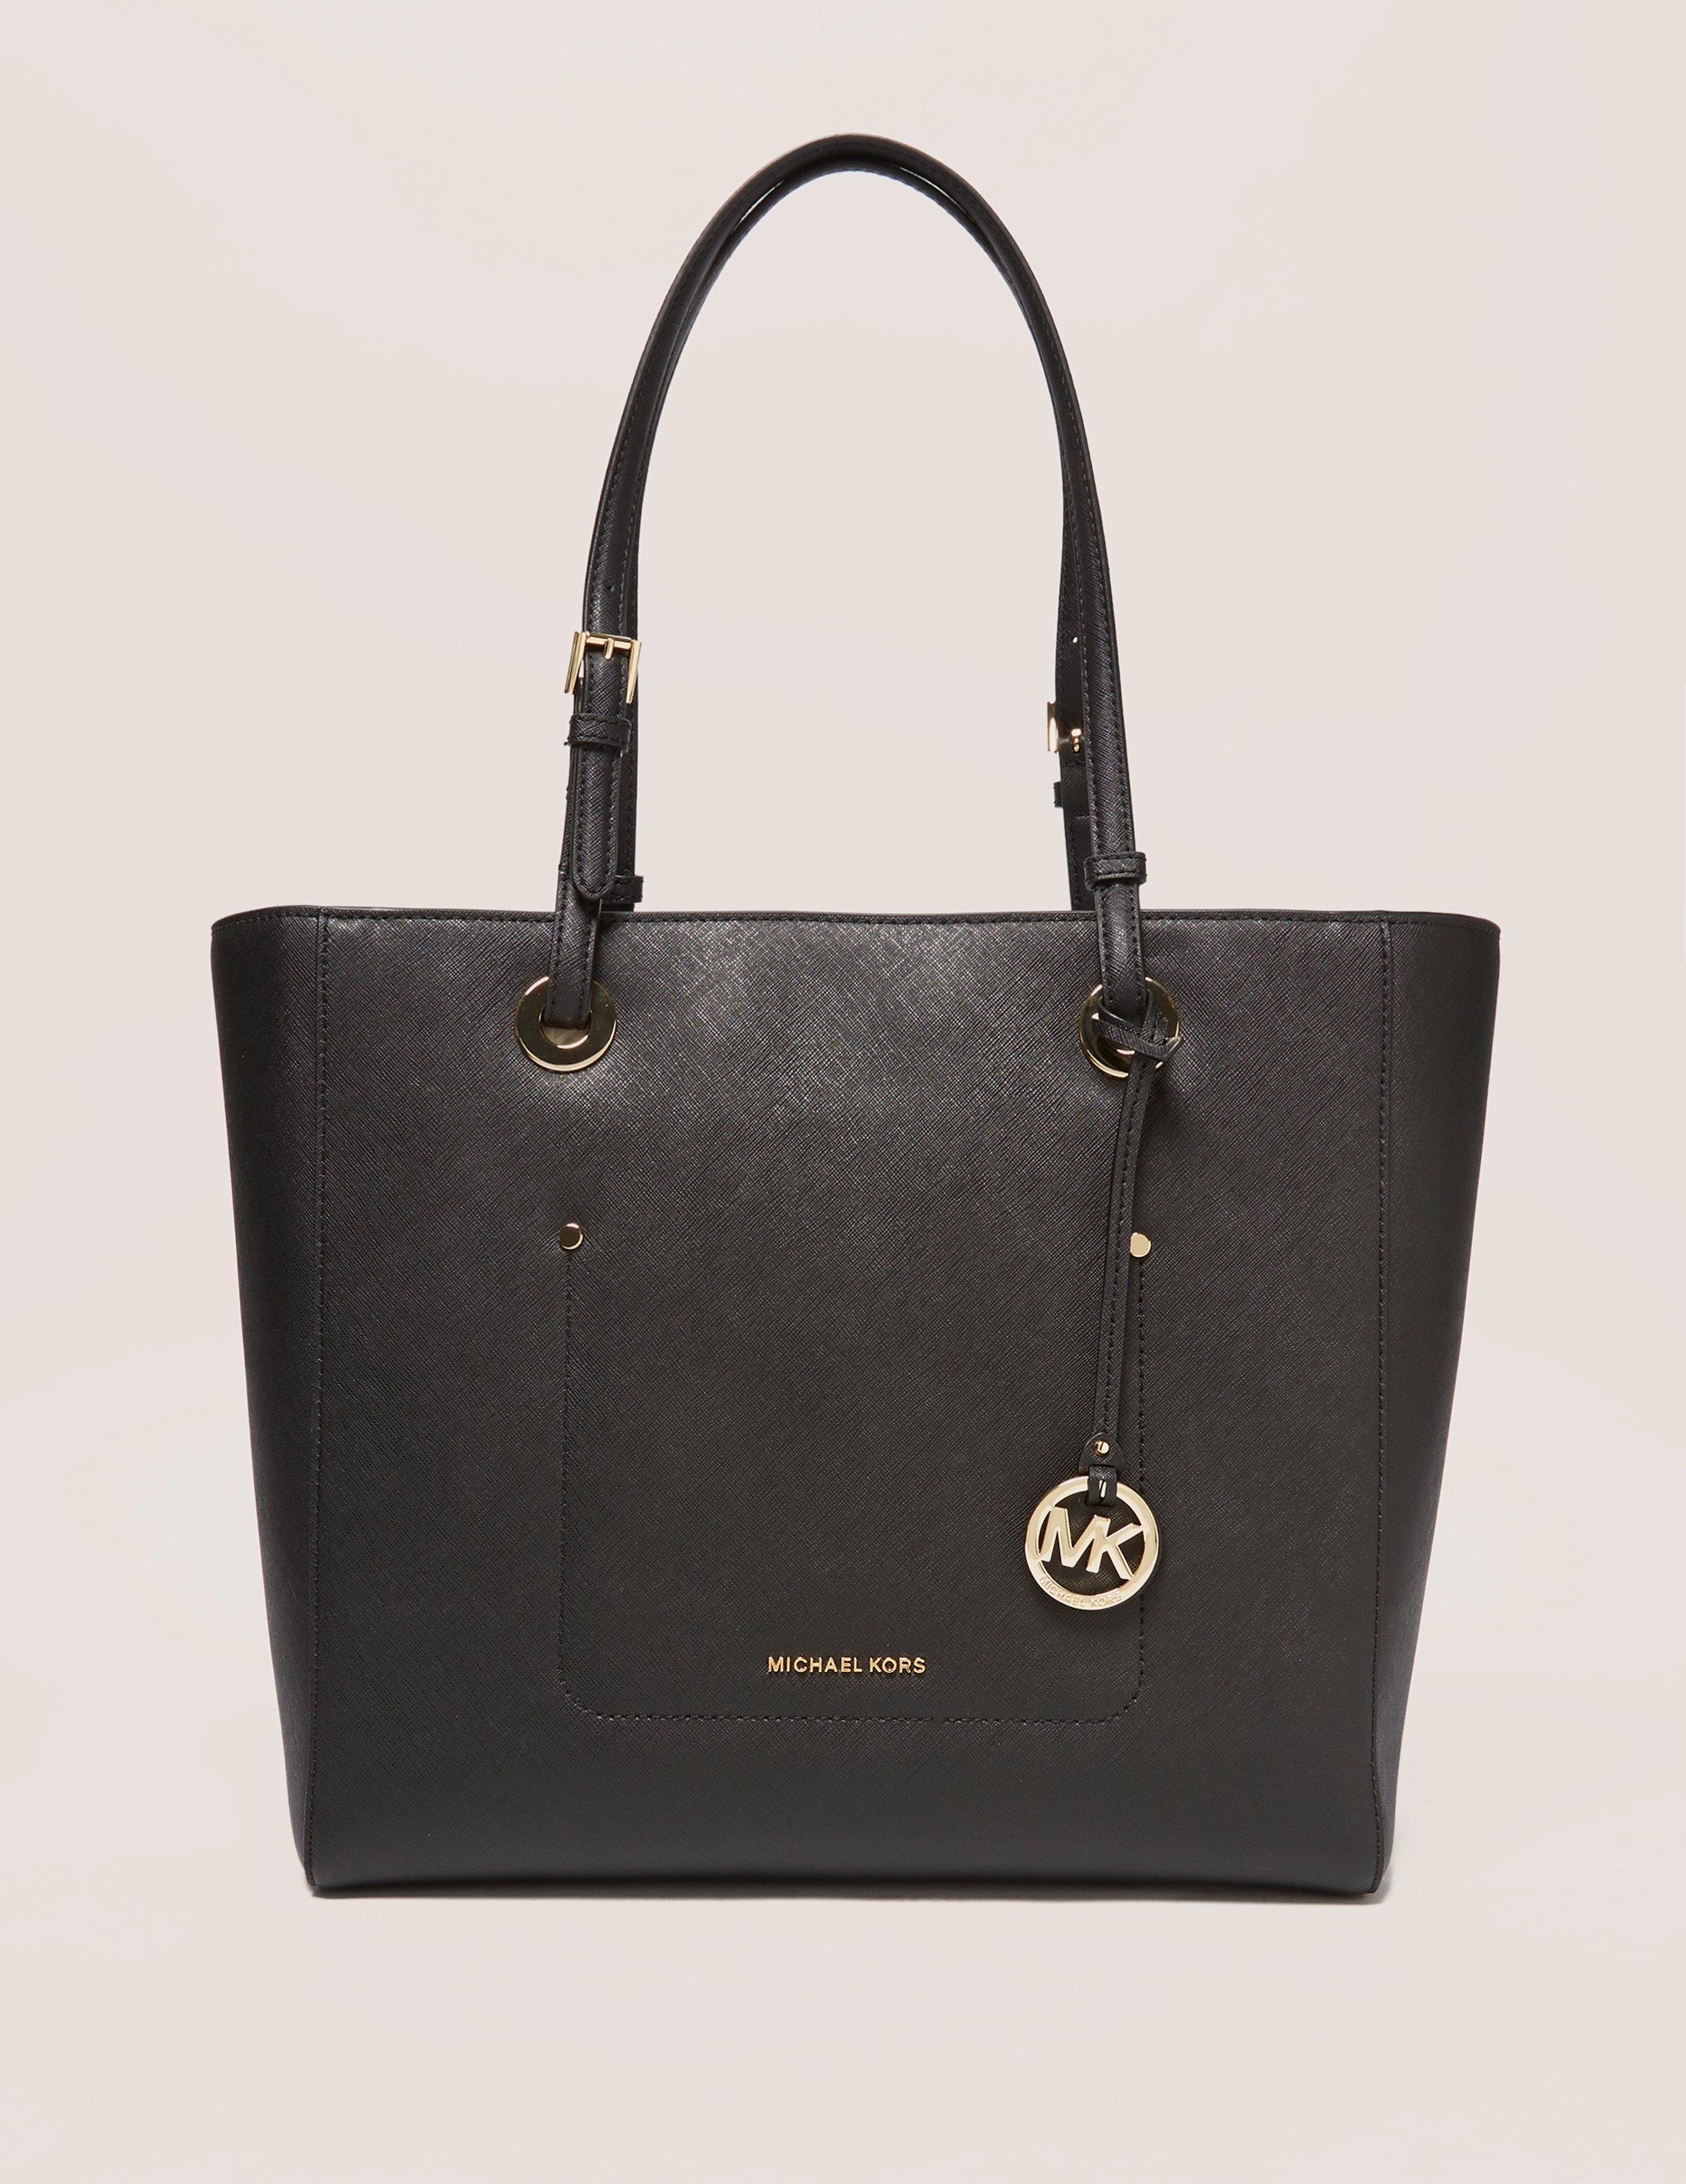 Michael Kors Leather Walsh Large Tote in Black - Lyst